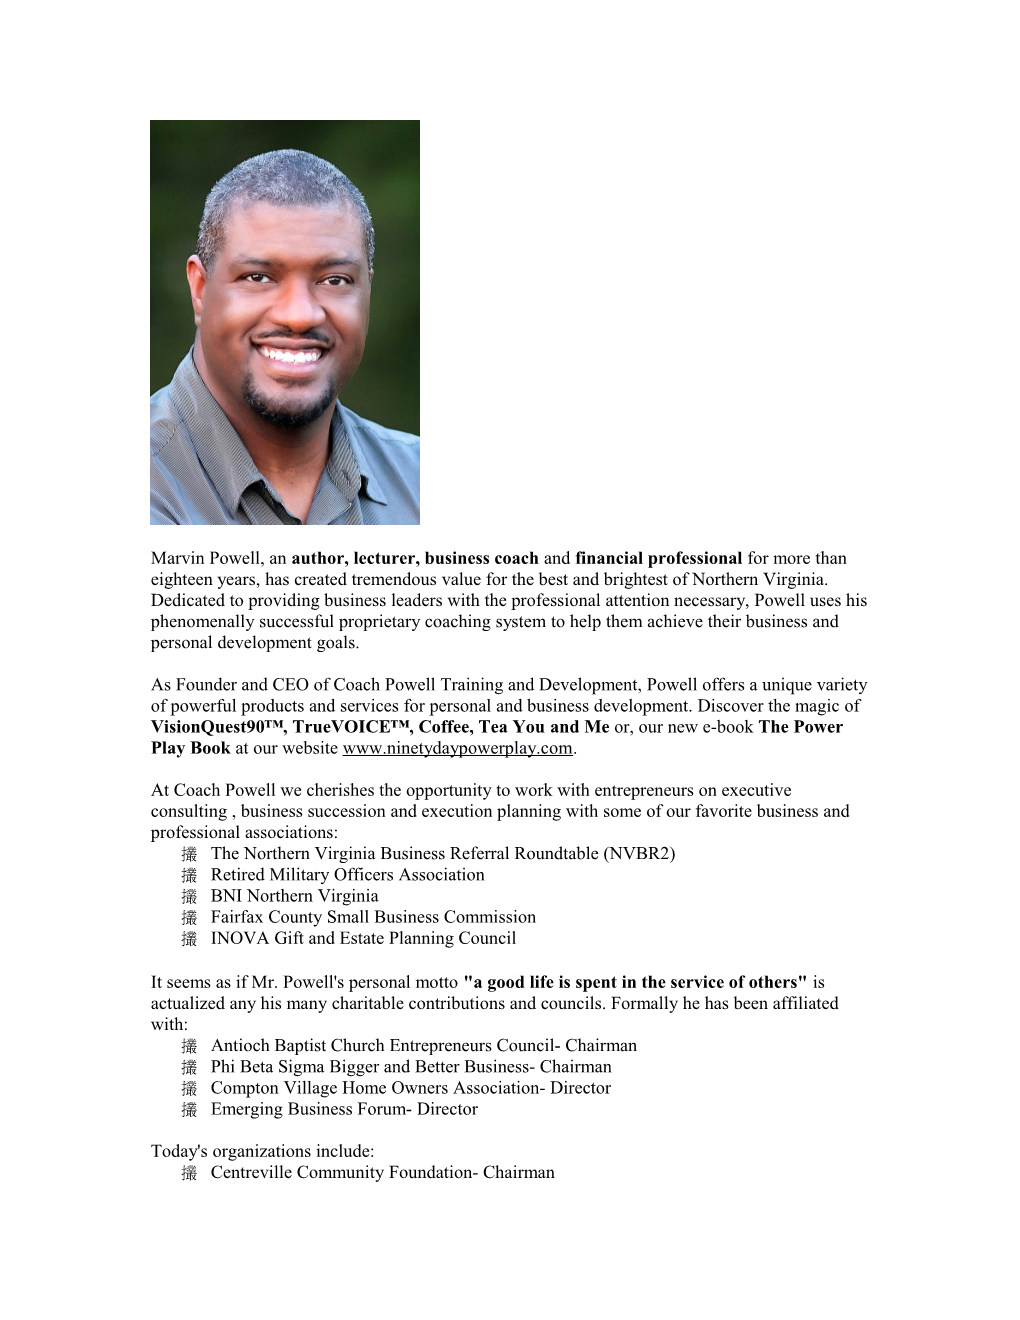 Marvin Powell an Author, Lecturer, Business Coach and Financial Professional for More Than